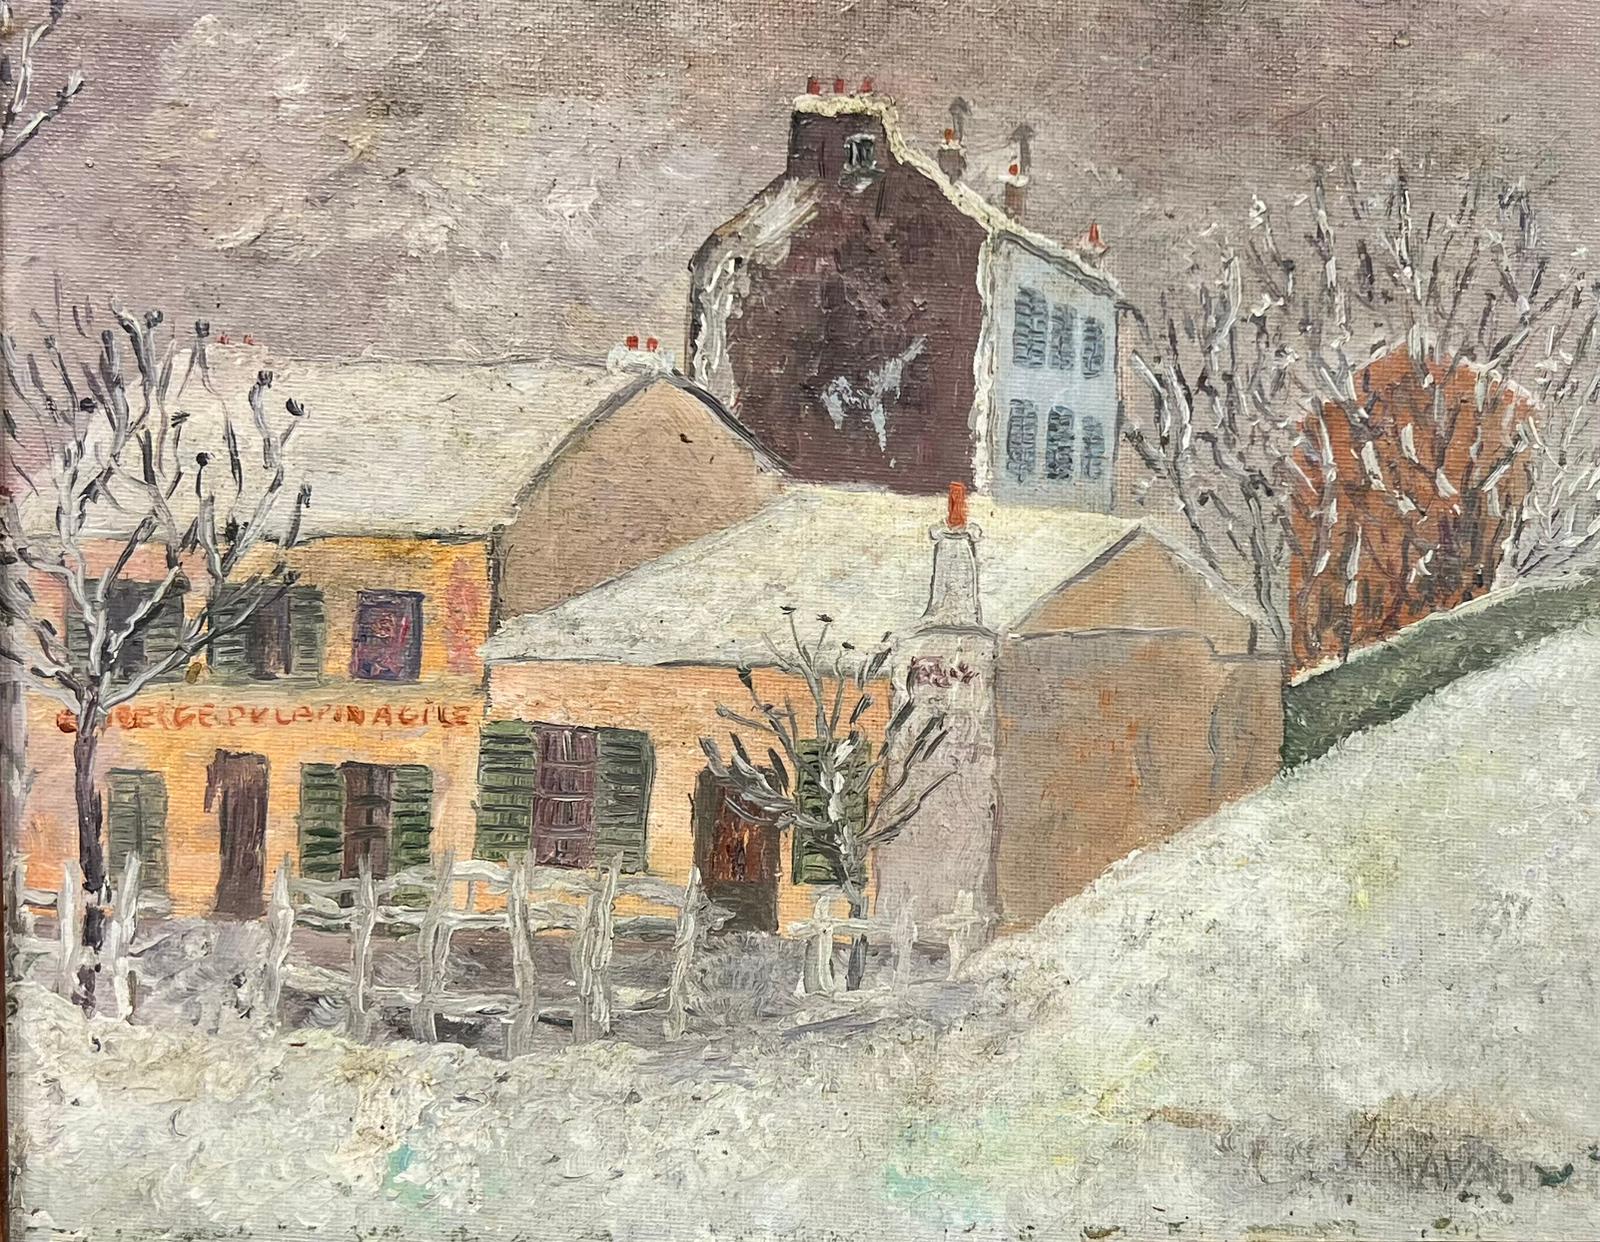 Montmartre Paris in Snow Latin Agile Street Scene Signed French Oil 20thC - Painting by French School